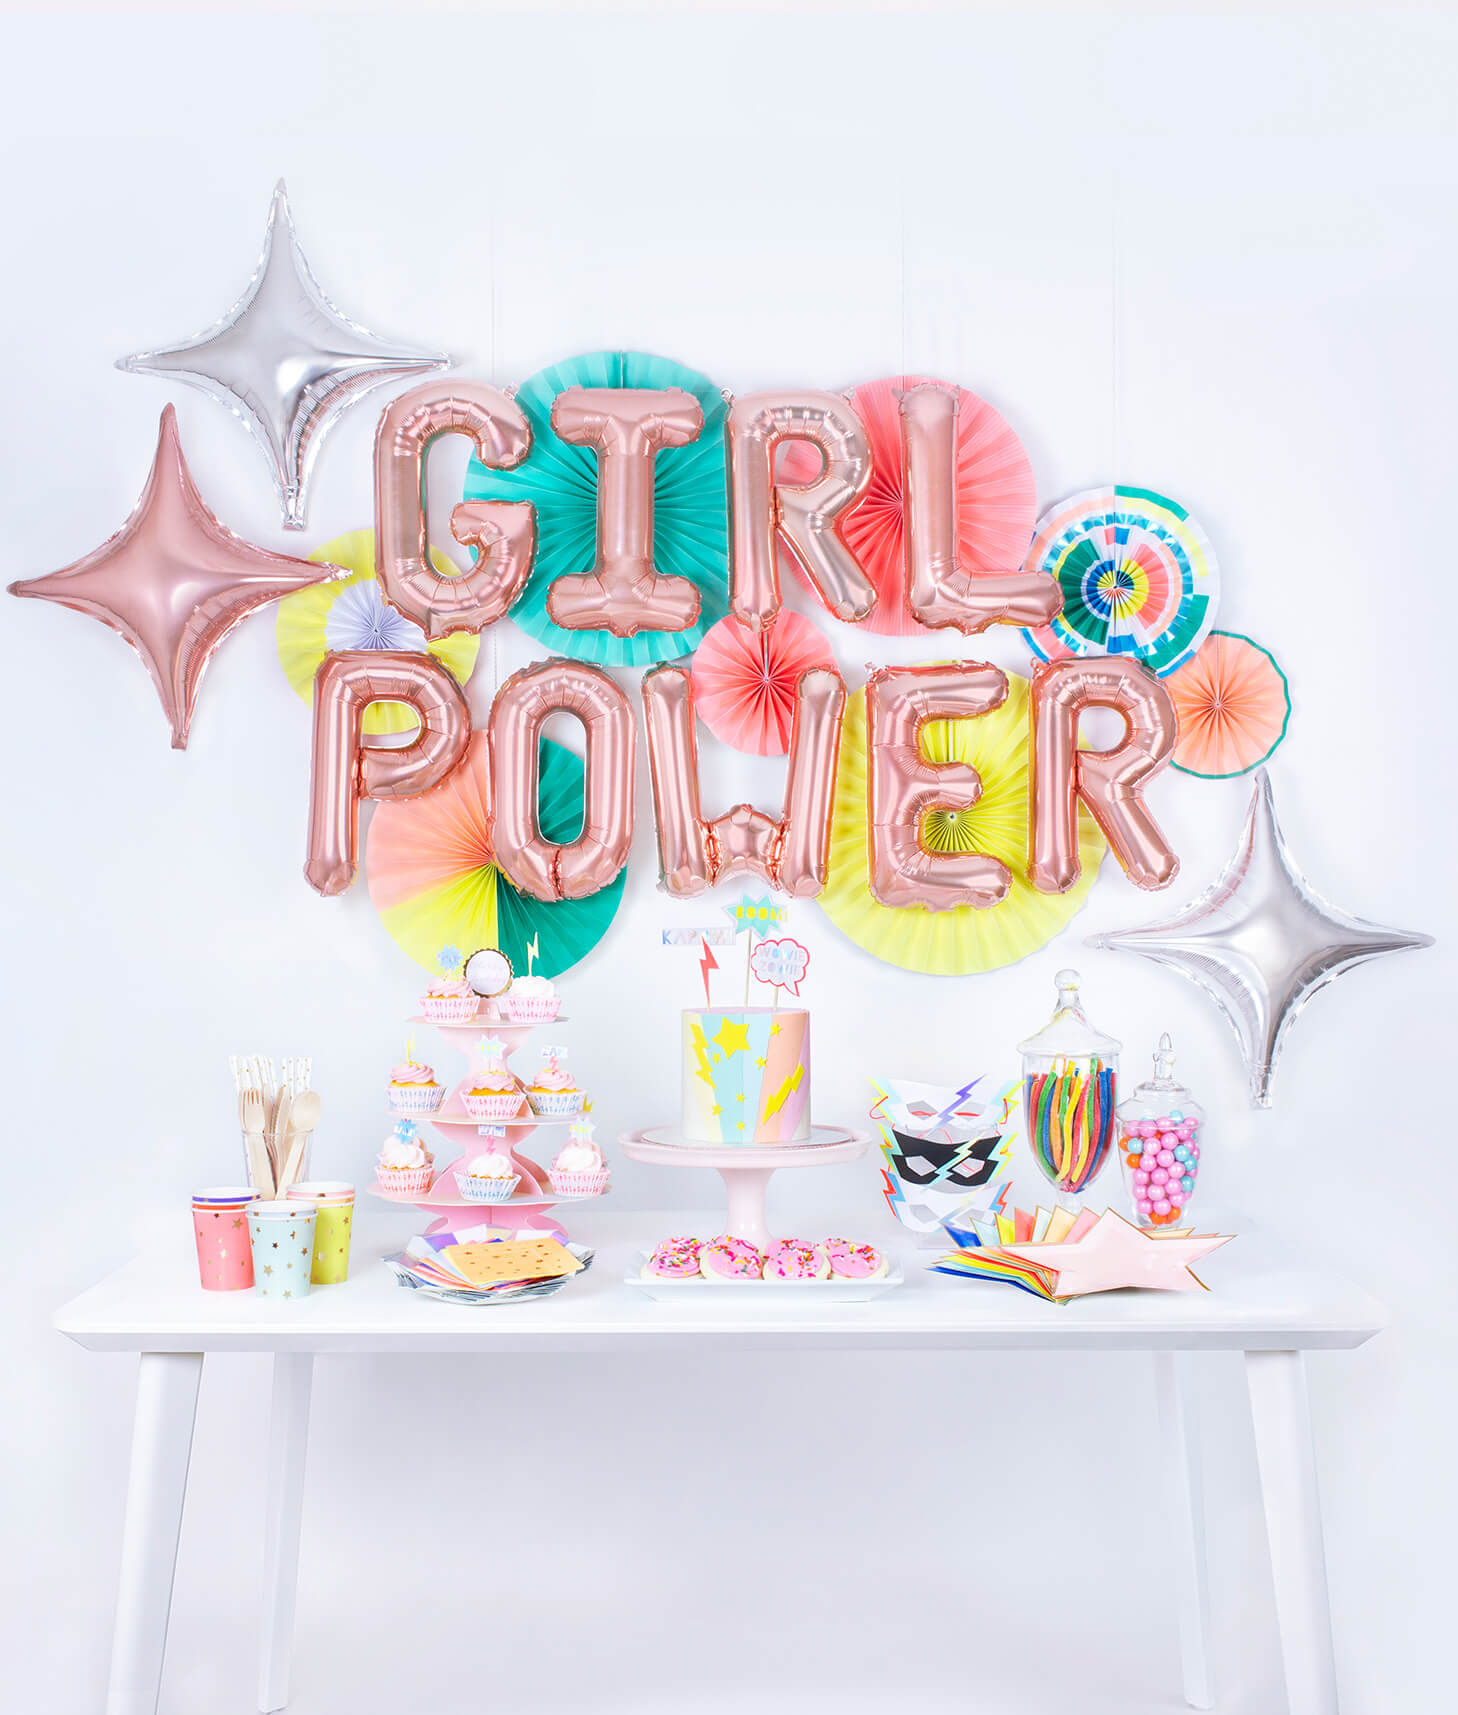  Girl Power Superhero themed Birthday Party Set Up in a box